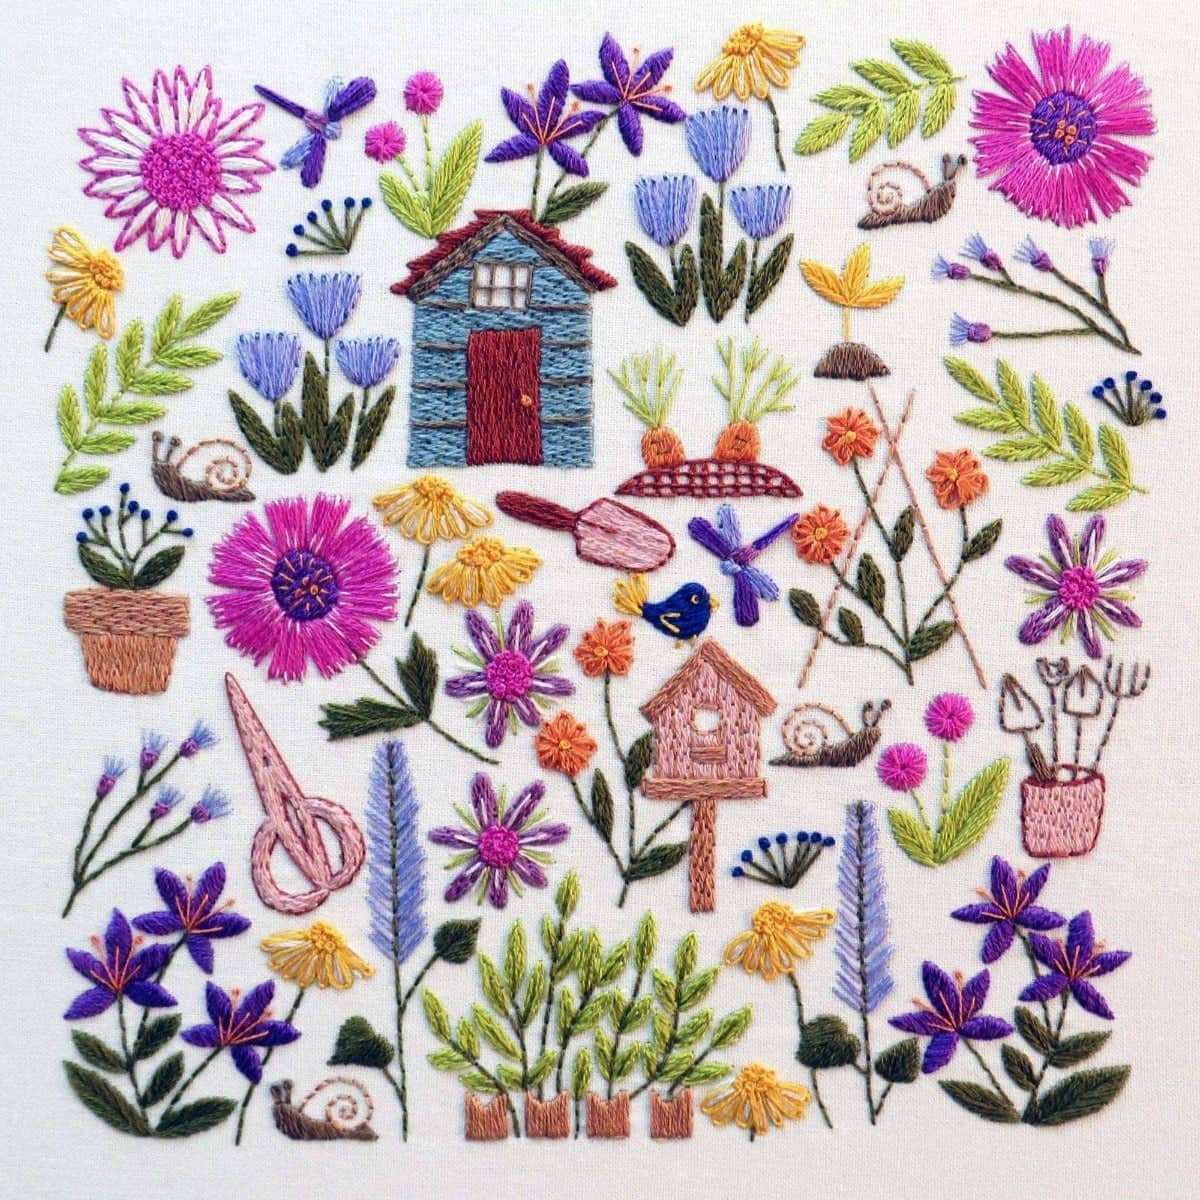 How does your Garden Grow, Pre Printed Embroidery Fabric Panel PLUS PDF Pattern , Pre Printed Fabric Pattern , StitchDoodles , bird embroidery, Embroidery, embroidery hoop, embroidery hoop kit, embroidery kits for beginners, embroidery pattern, garden embroidery, hand embroidery, hand embroidery fabric, hand embroidery kit, hand embroidery seat frame, nurge embroidery hoop, PDF pattern, Printed Pattern, unique embroidery kits , StitchDoodles , shop.stitchdoodles.com